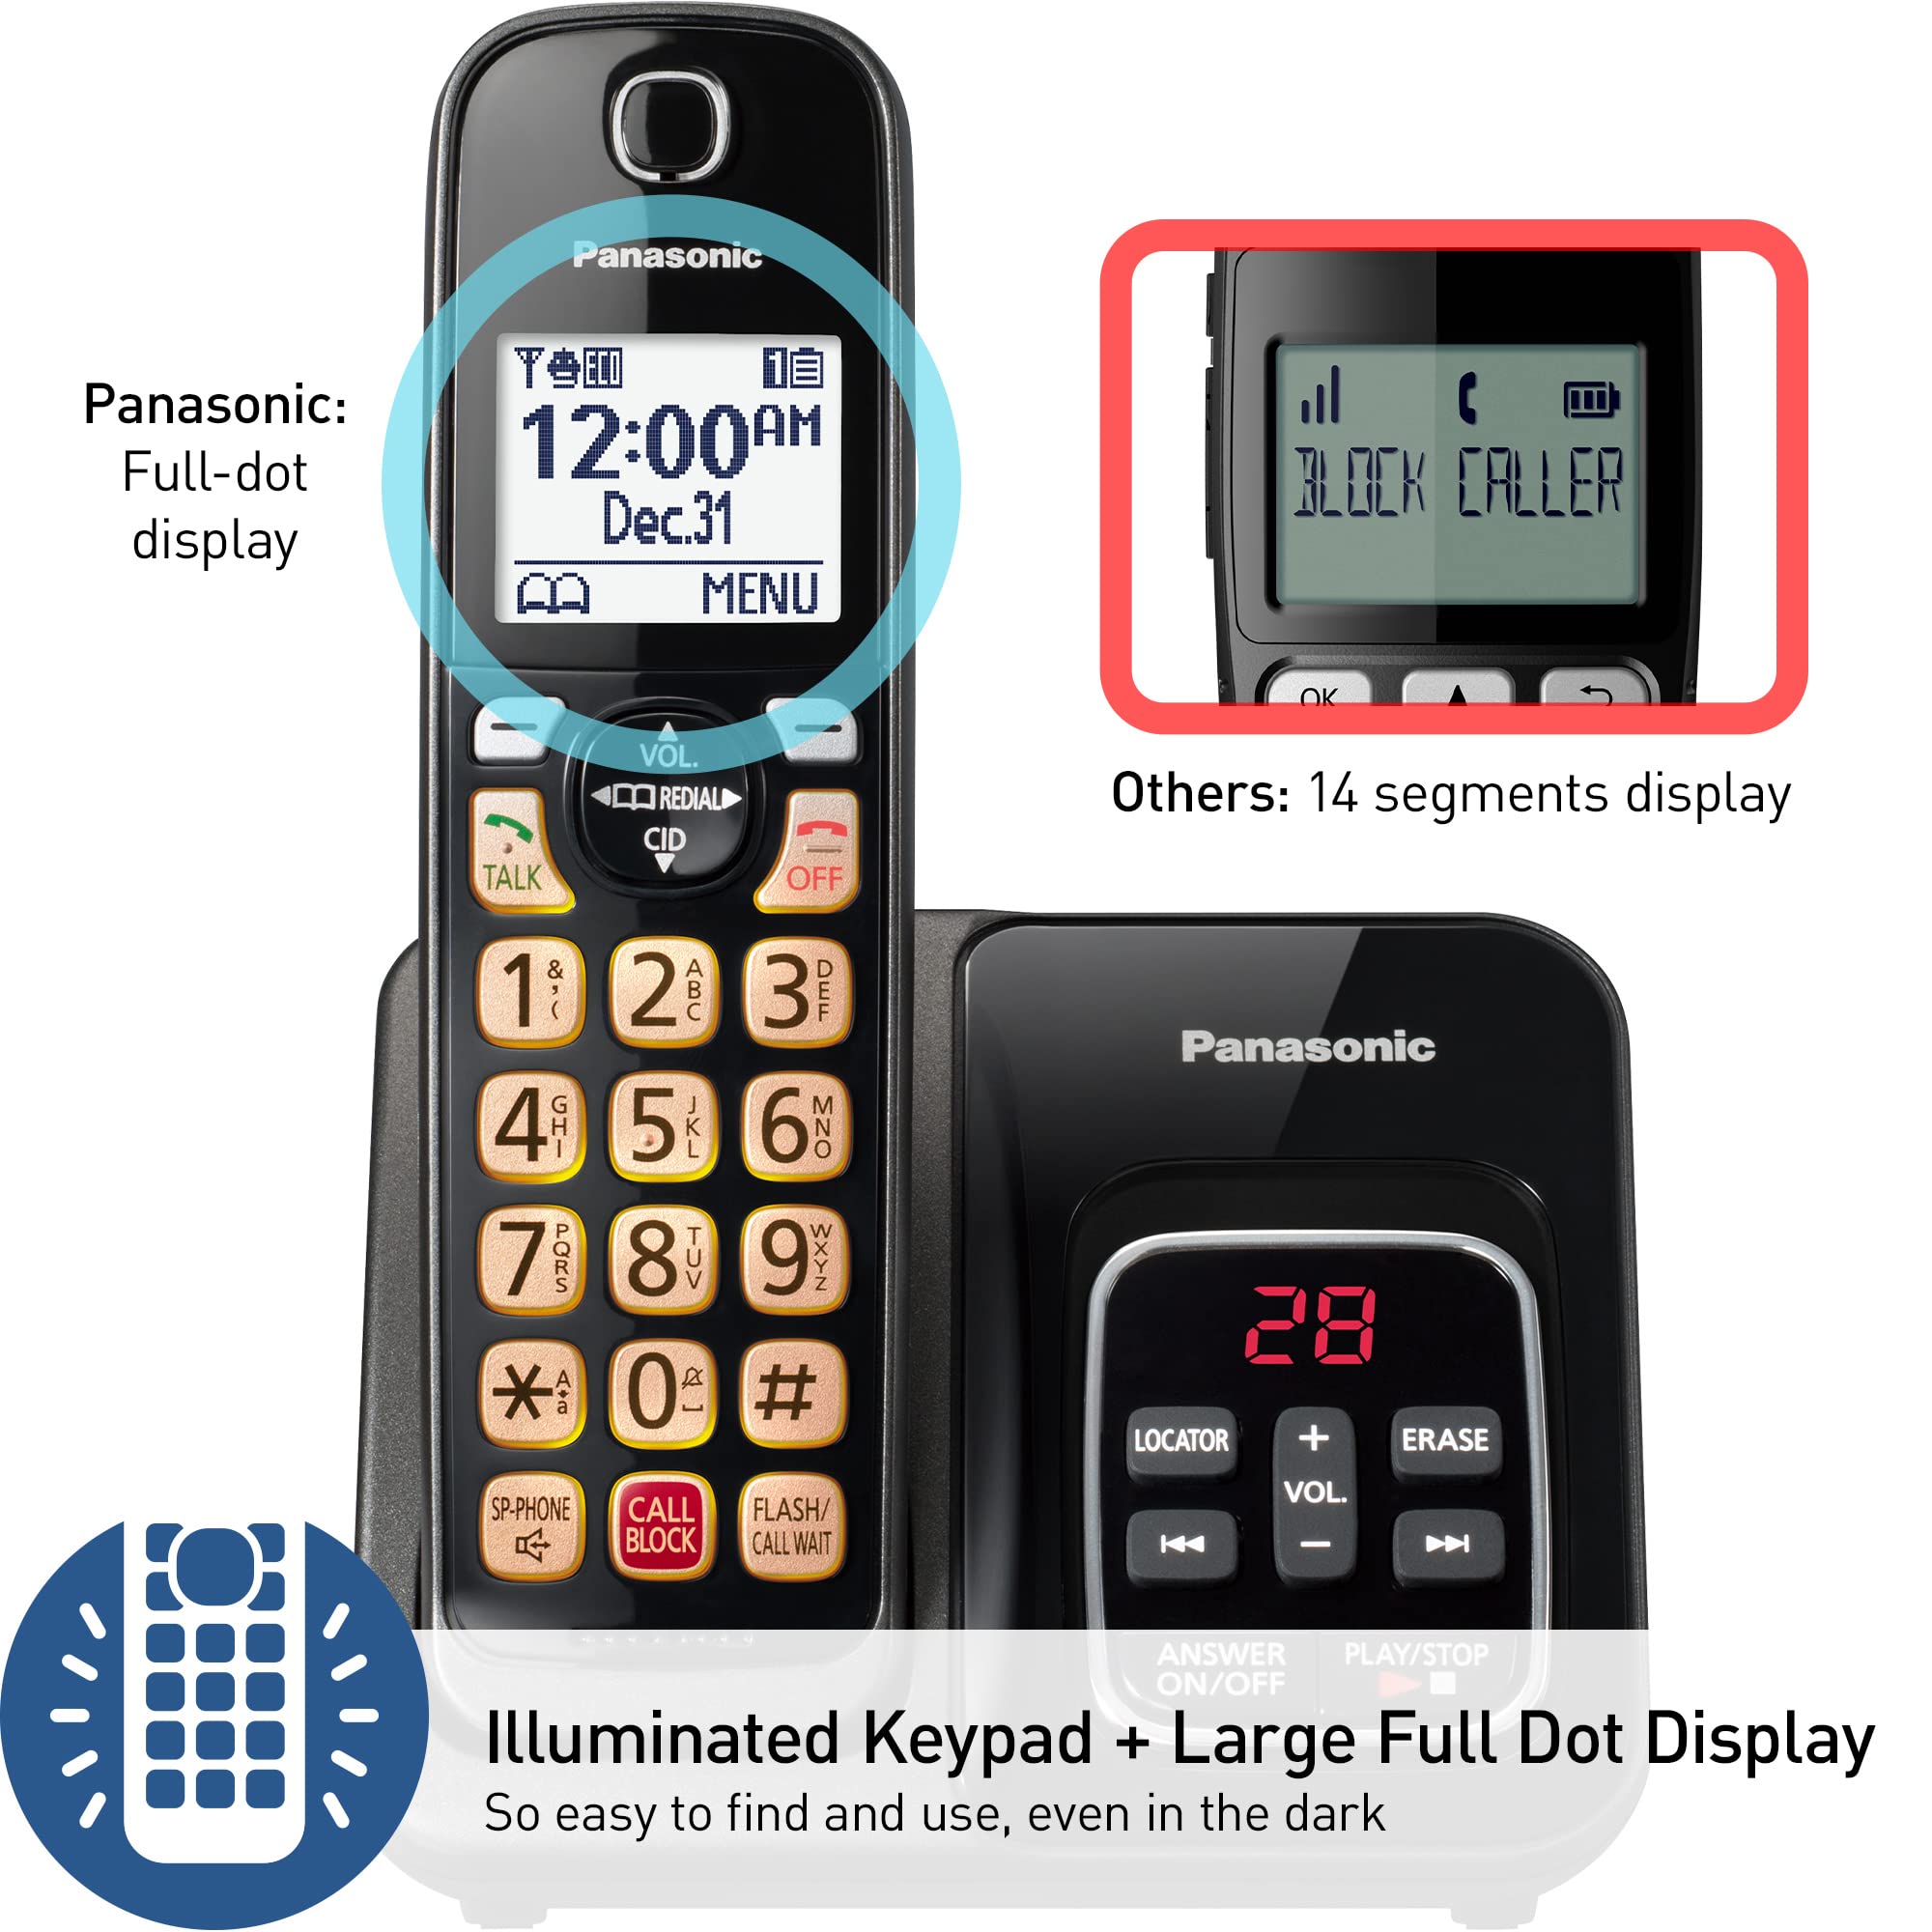 Panasonic Cordless Phone with Answering Machine, Advanced Call Block, Bilingual Caller ID and Easy to Read High-Contrast Display, Expandable System with 2 Handsets - KX-TGD832M (Metallic Black)